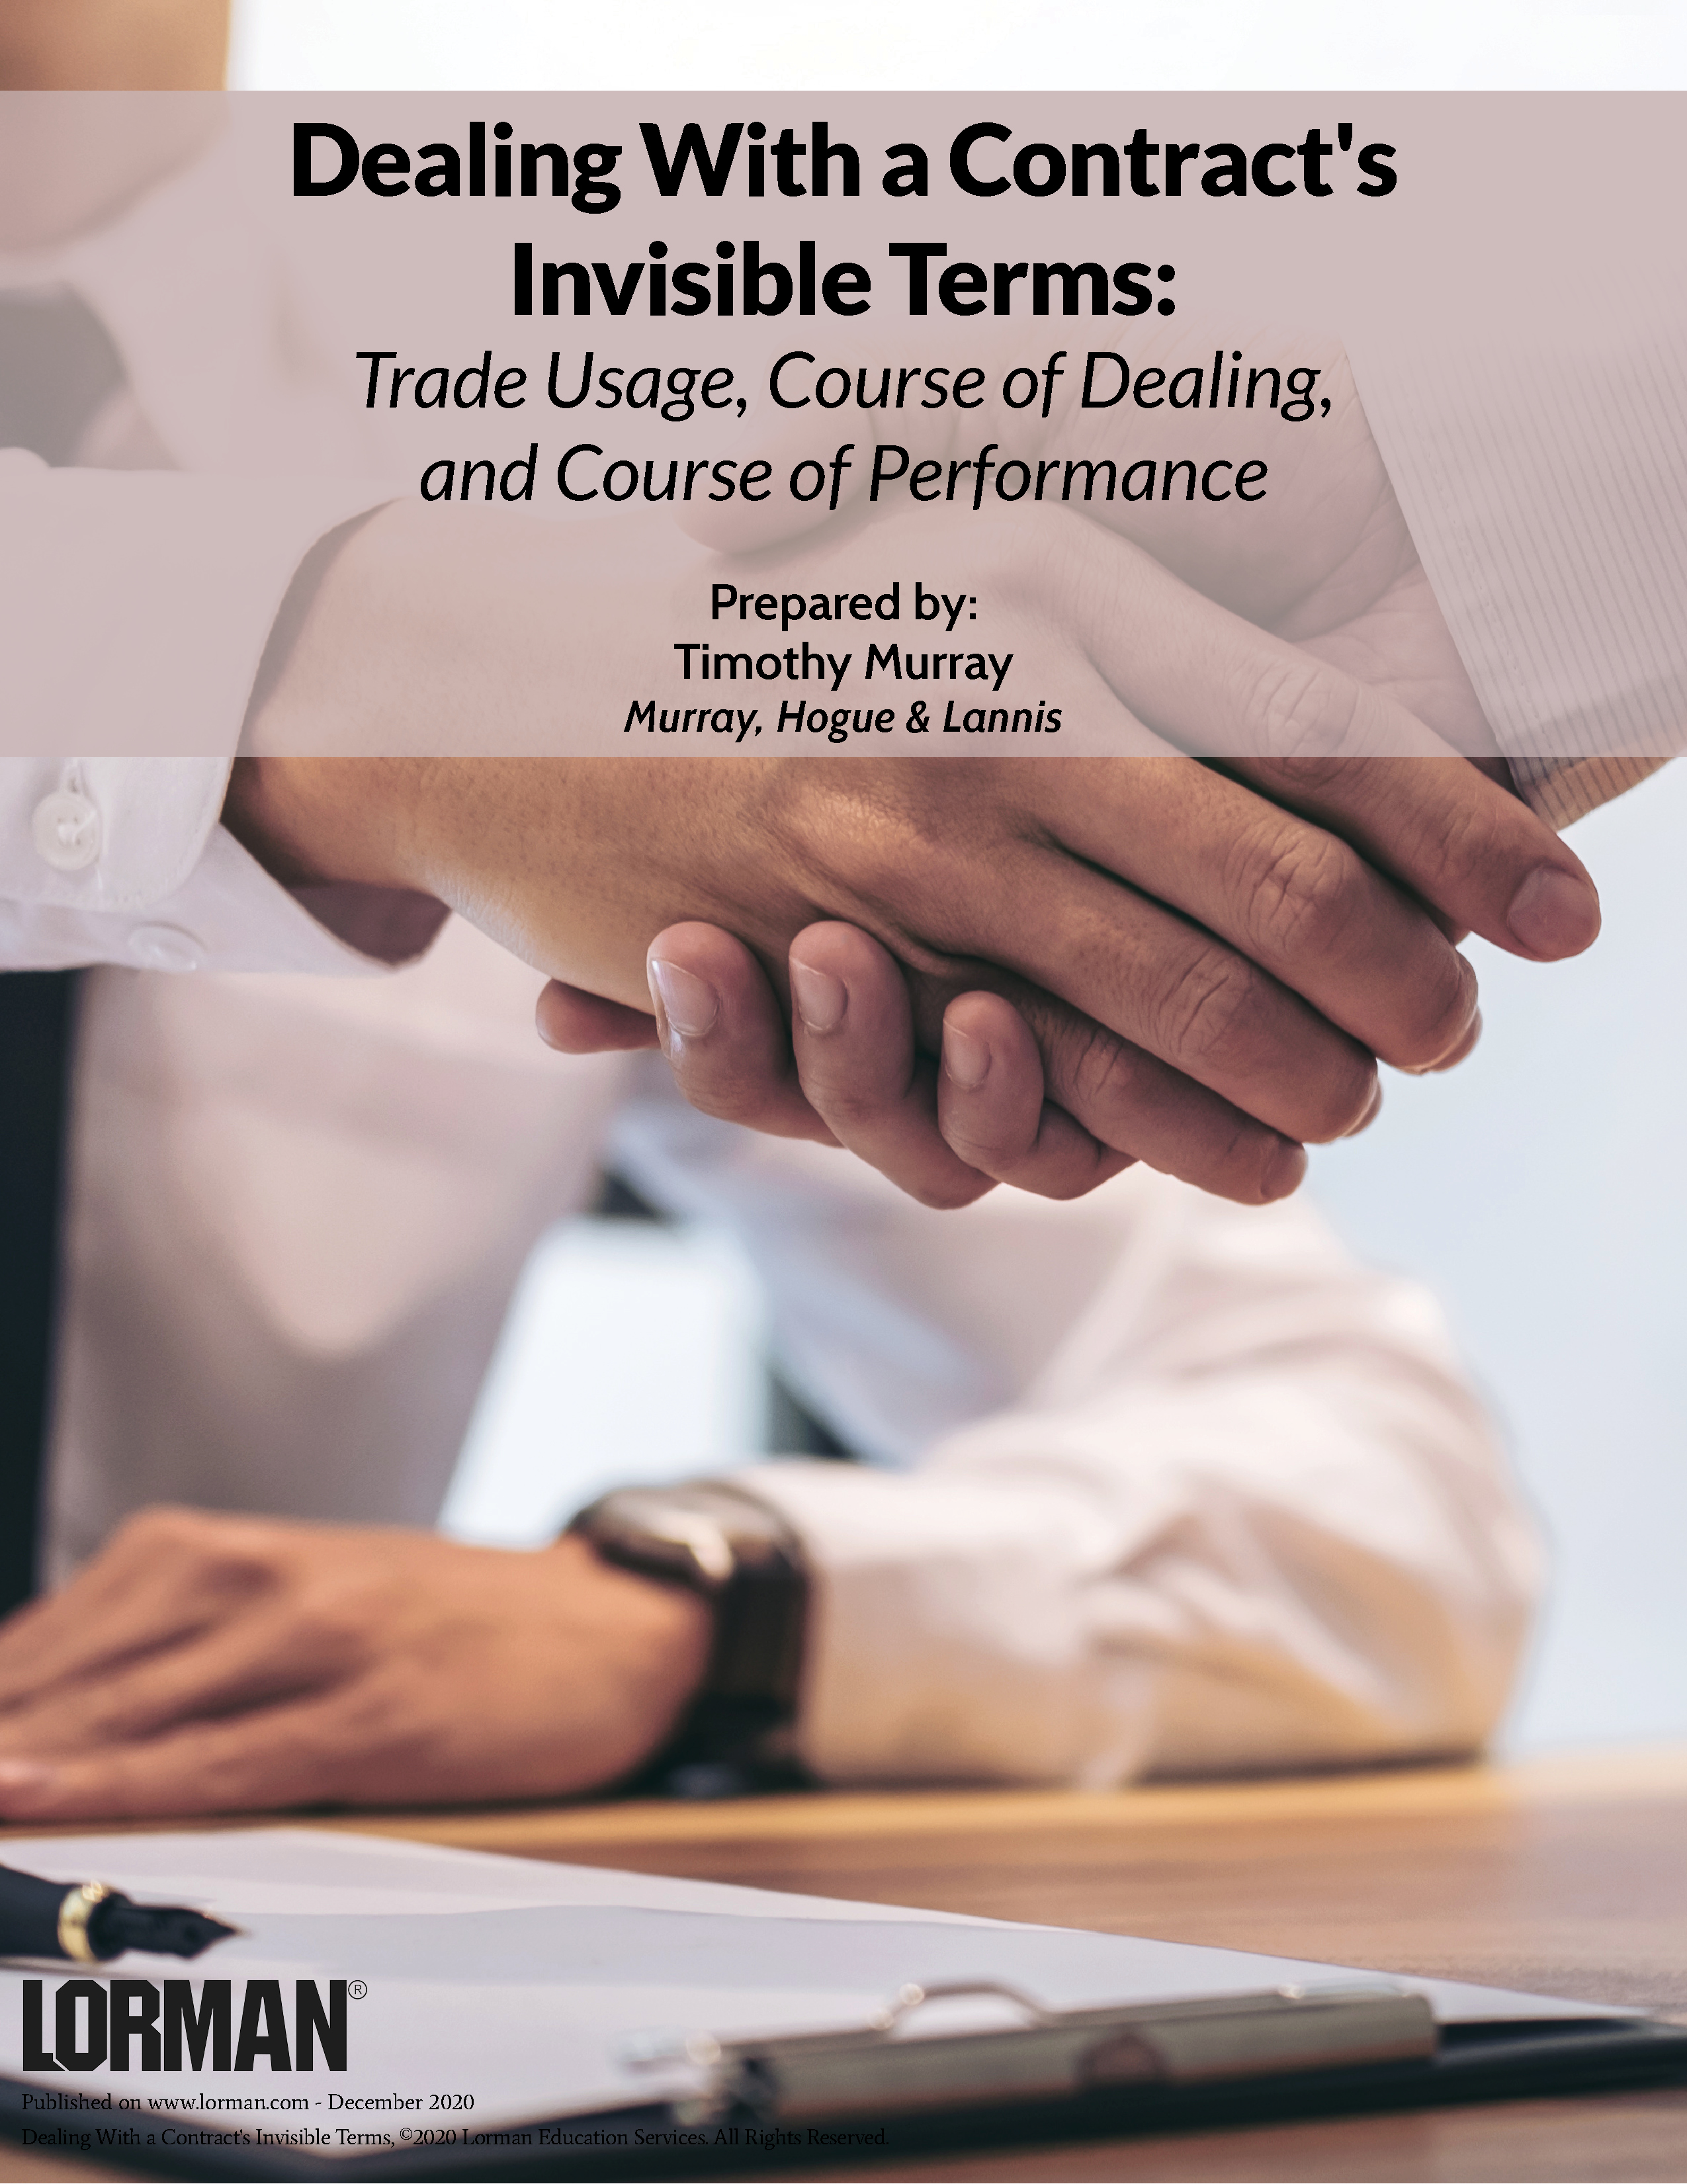 Dealing With a Contract's Invisible Terms: Trade Usage, Course of Dealing, and Course of Performance